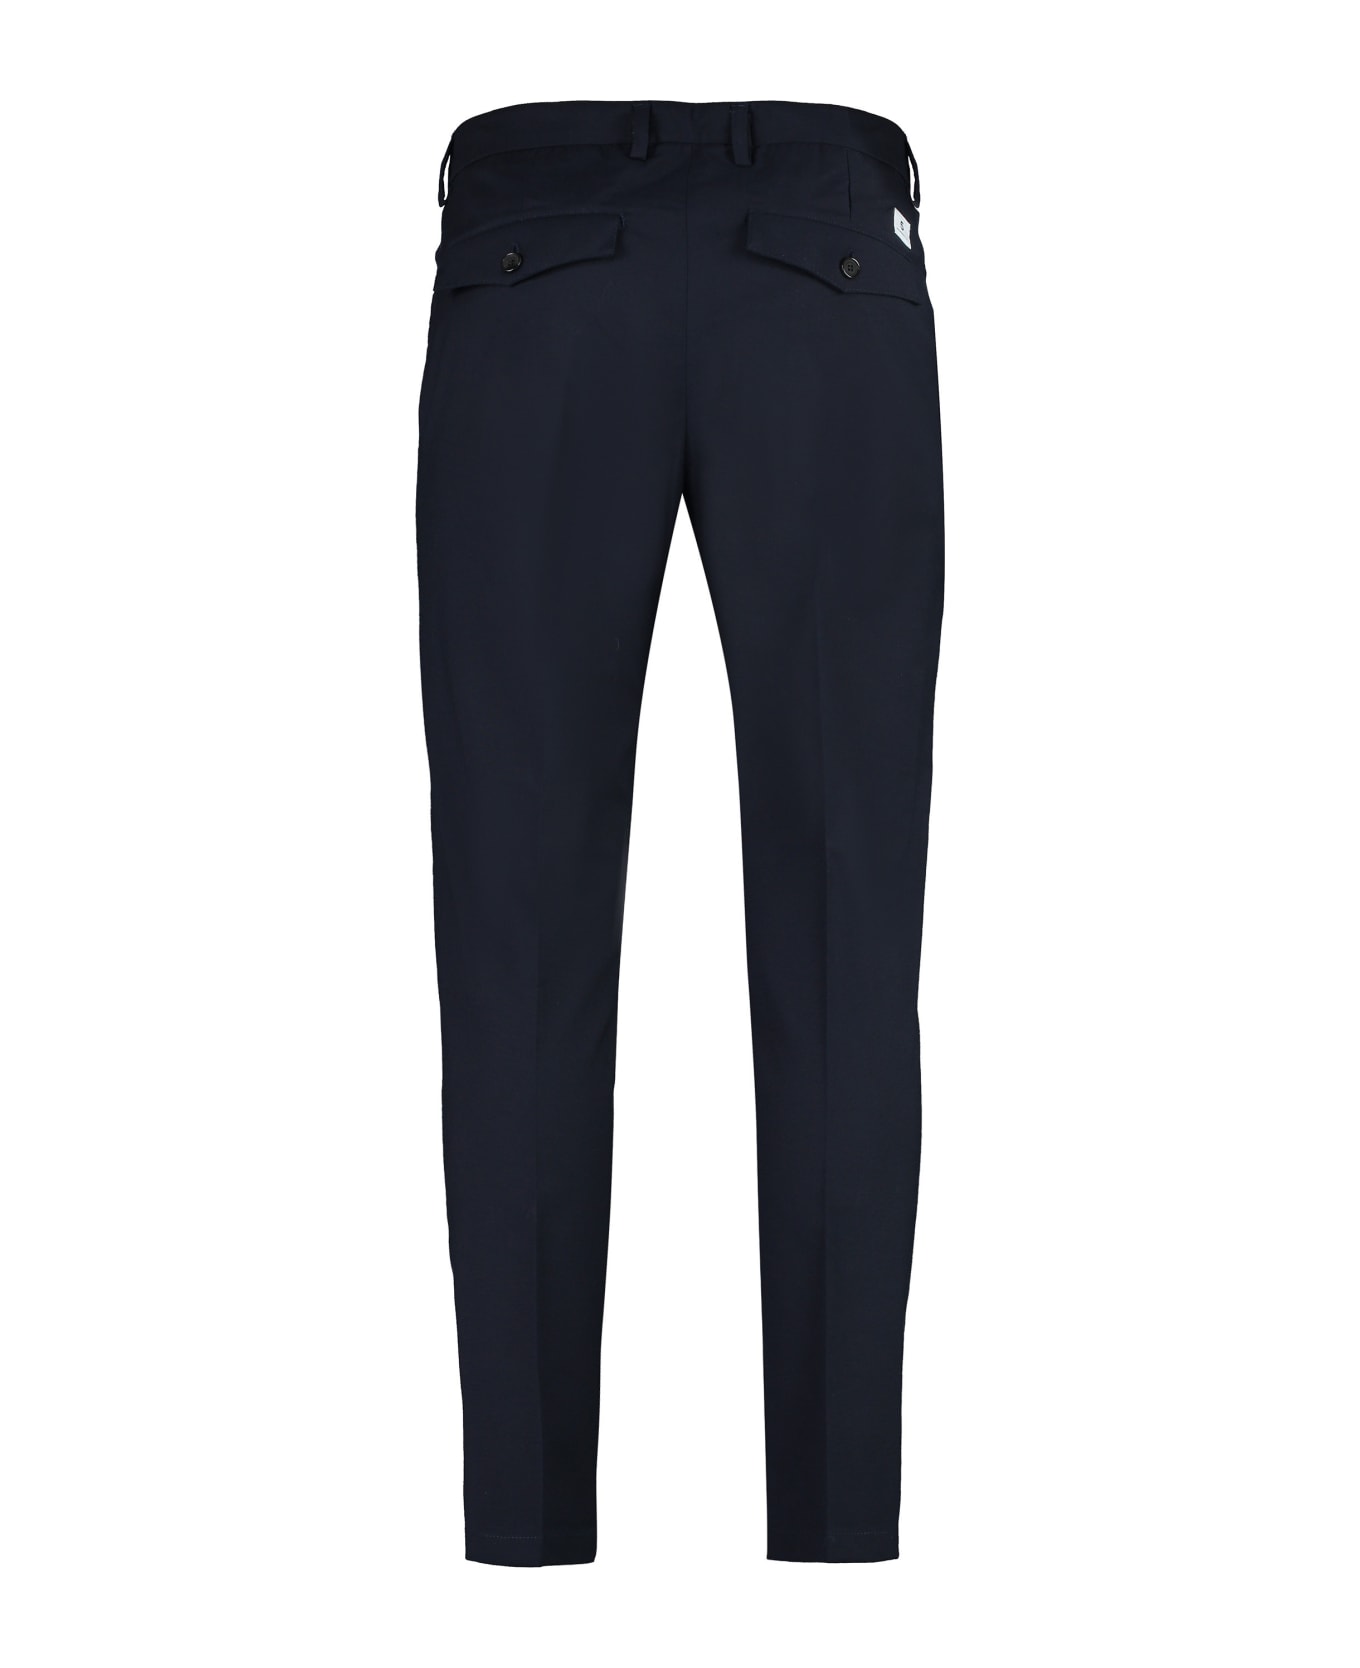 Department Five Prince Chino Pants - blue